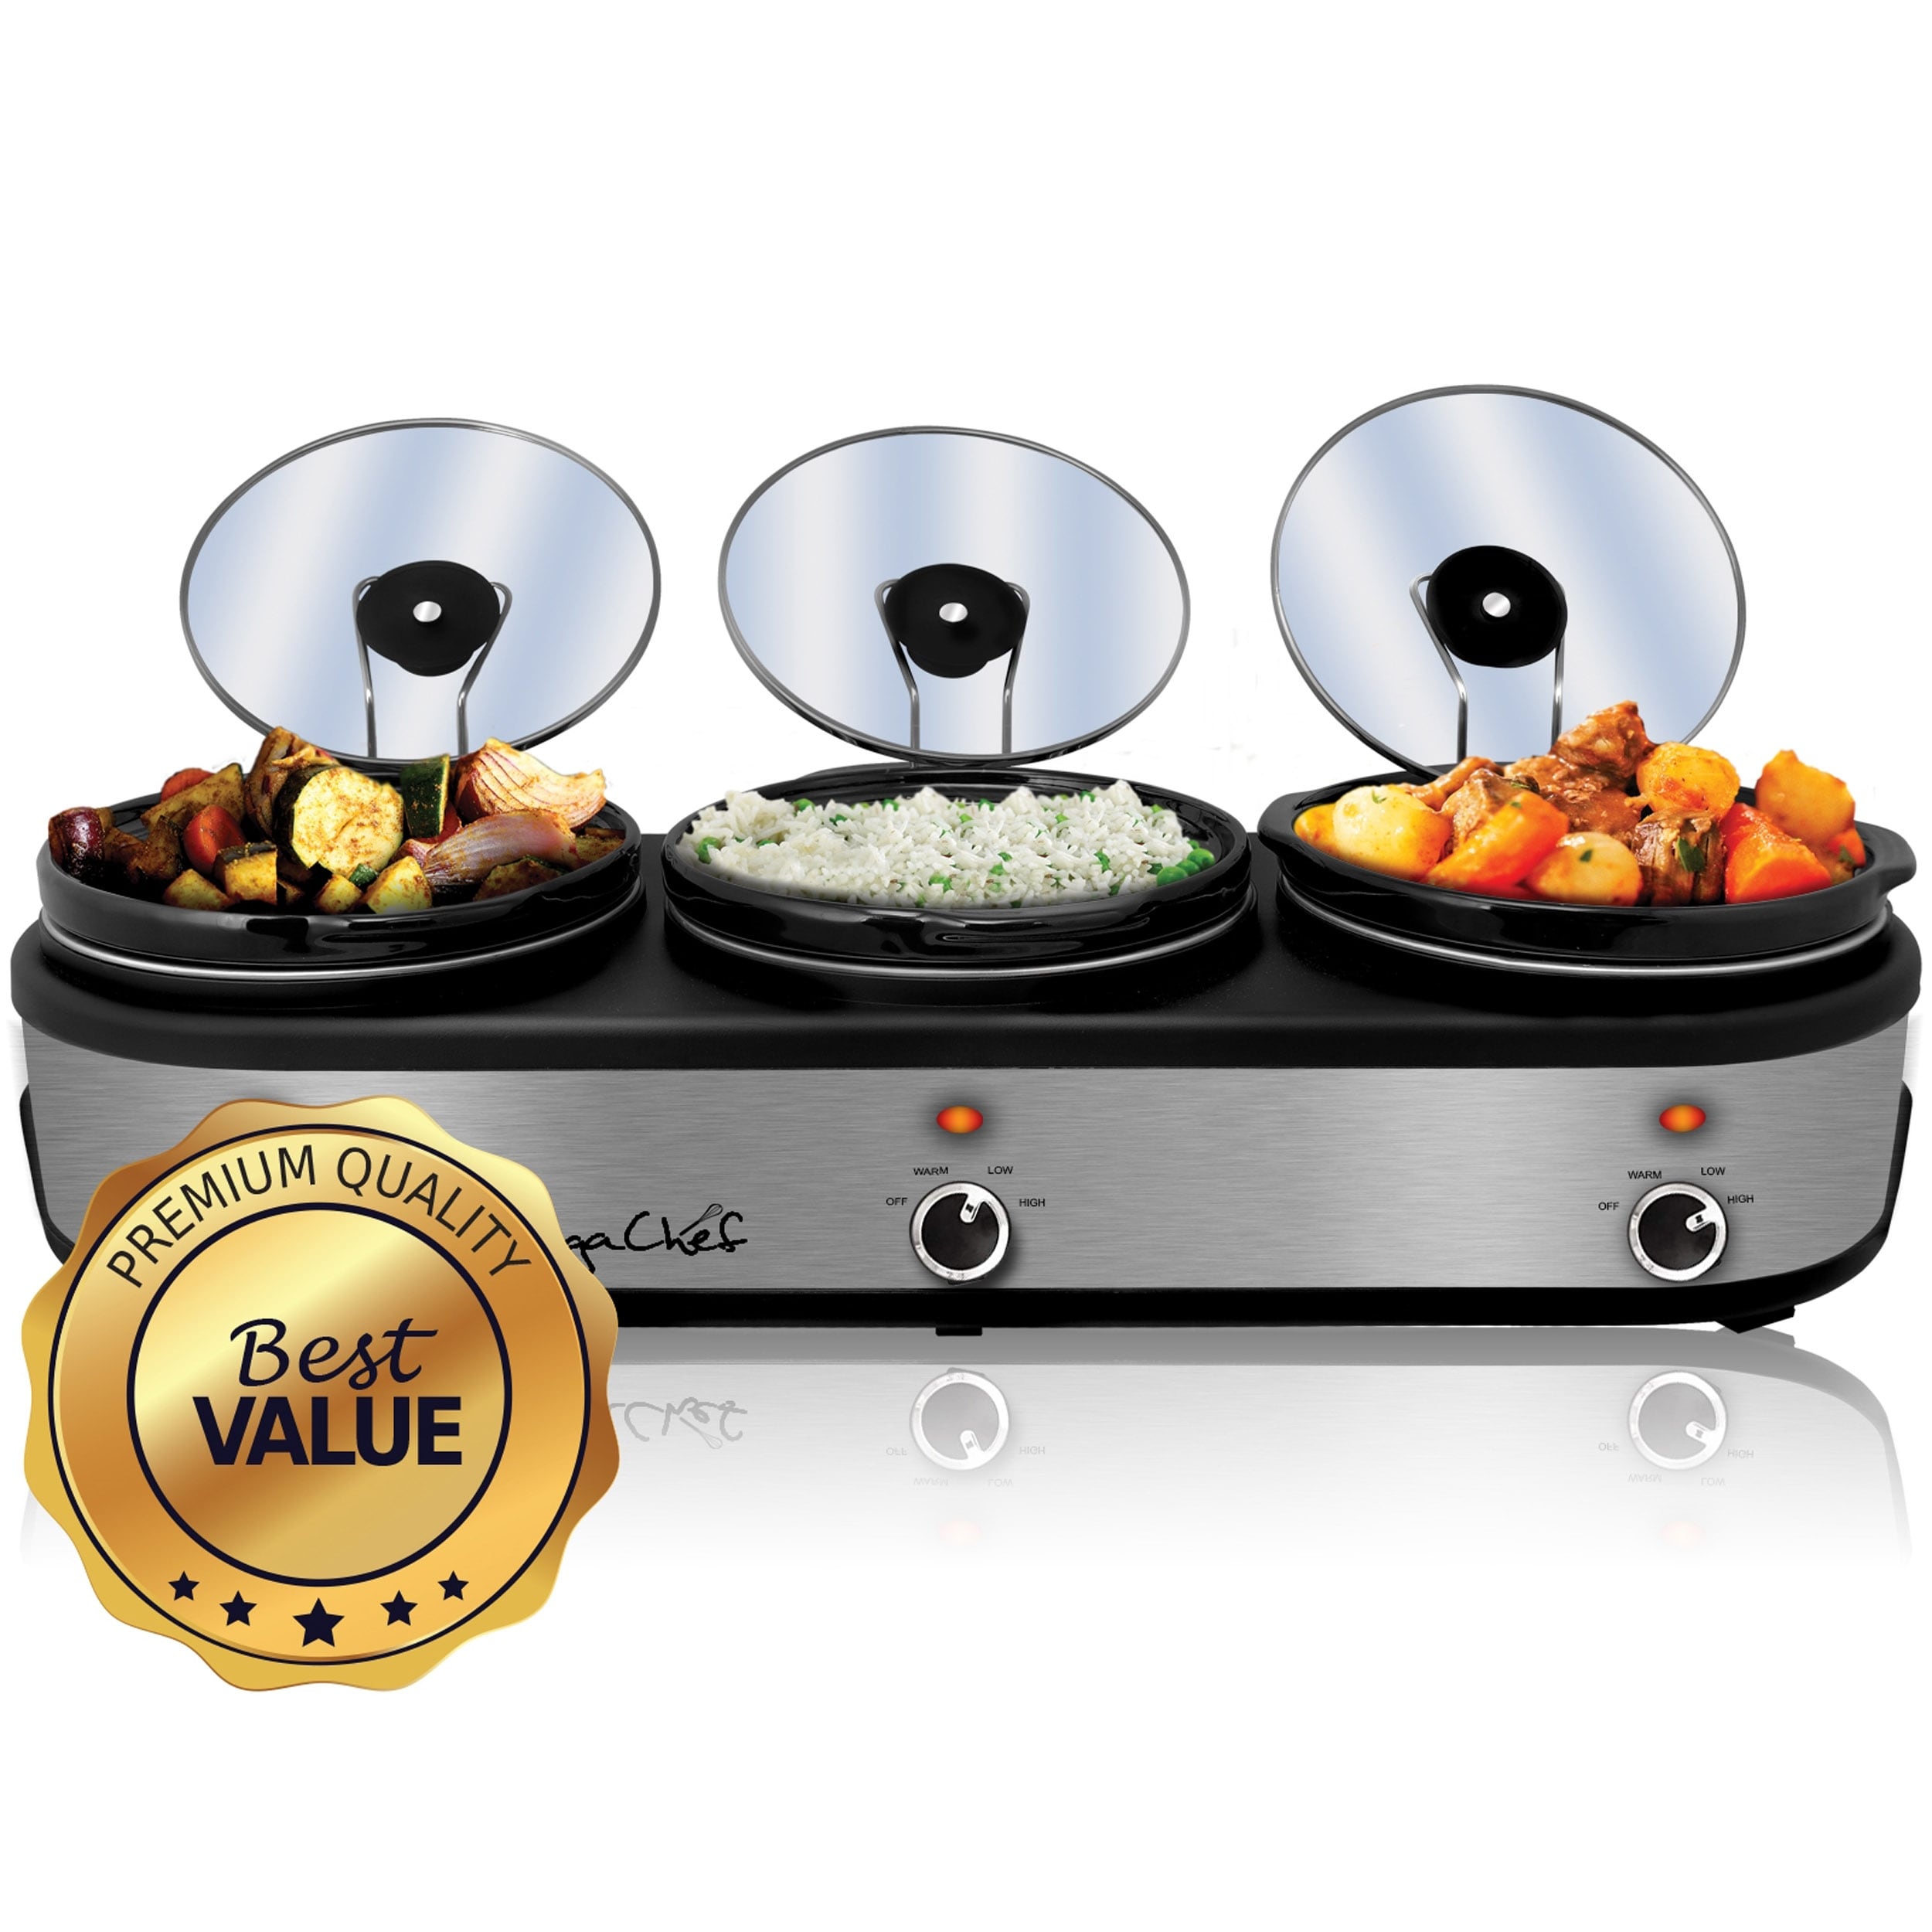 https://ak1.ostkcdn.com/images/products/is/images/direct/68adde2196701dbf6ff7ac37d6547e5b81835548/MegaChef-Buffet-Server-Slow-Cooker-with-Triple-2.5-Quart-Cooking-Pots.jpg